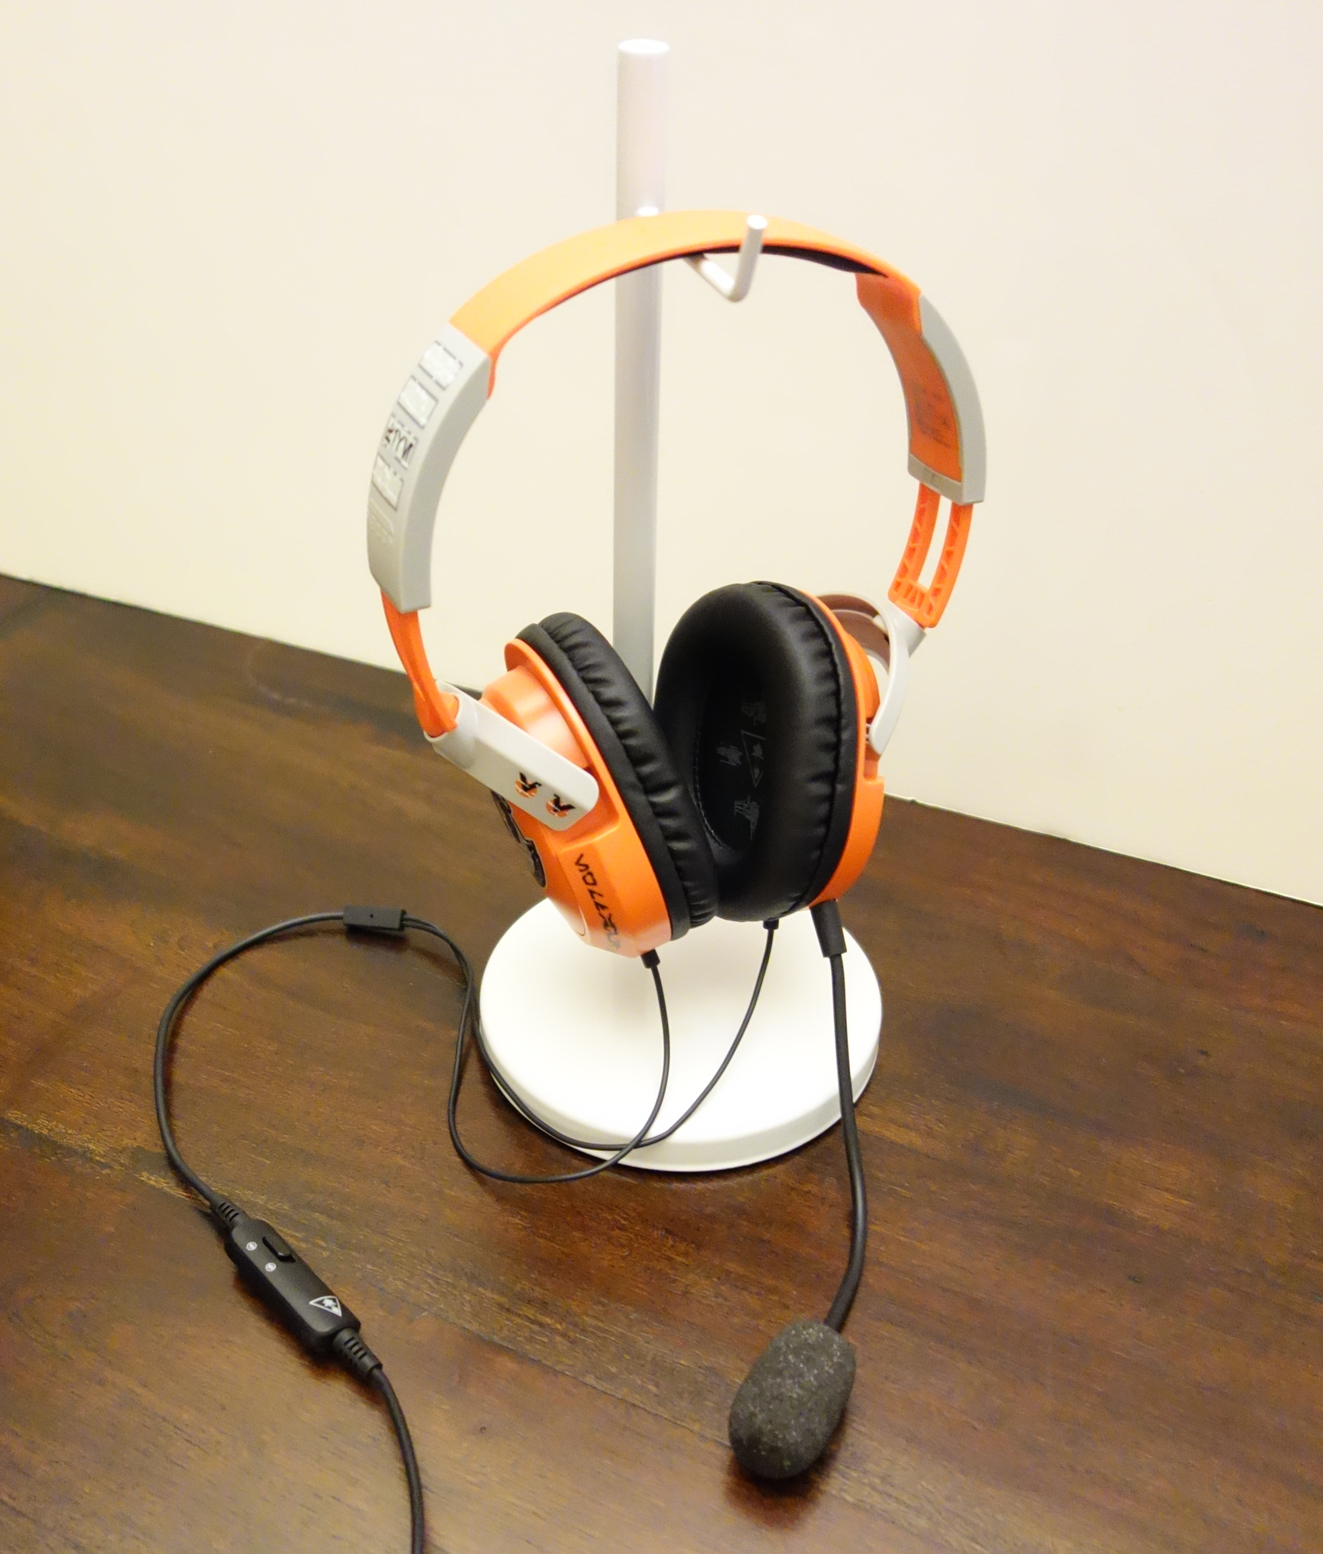 Turtle Beach Star Wars X-Wing Pilot Gaming Headset review